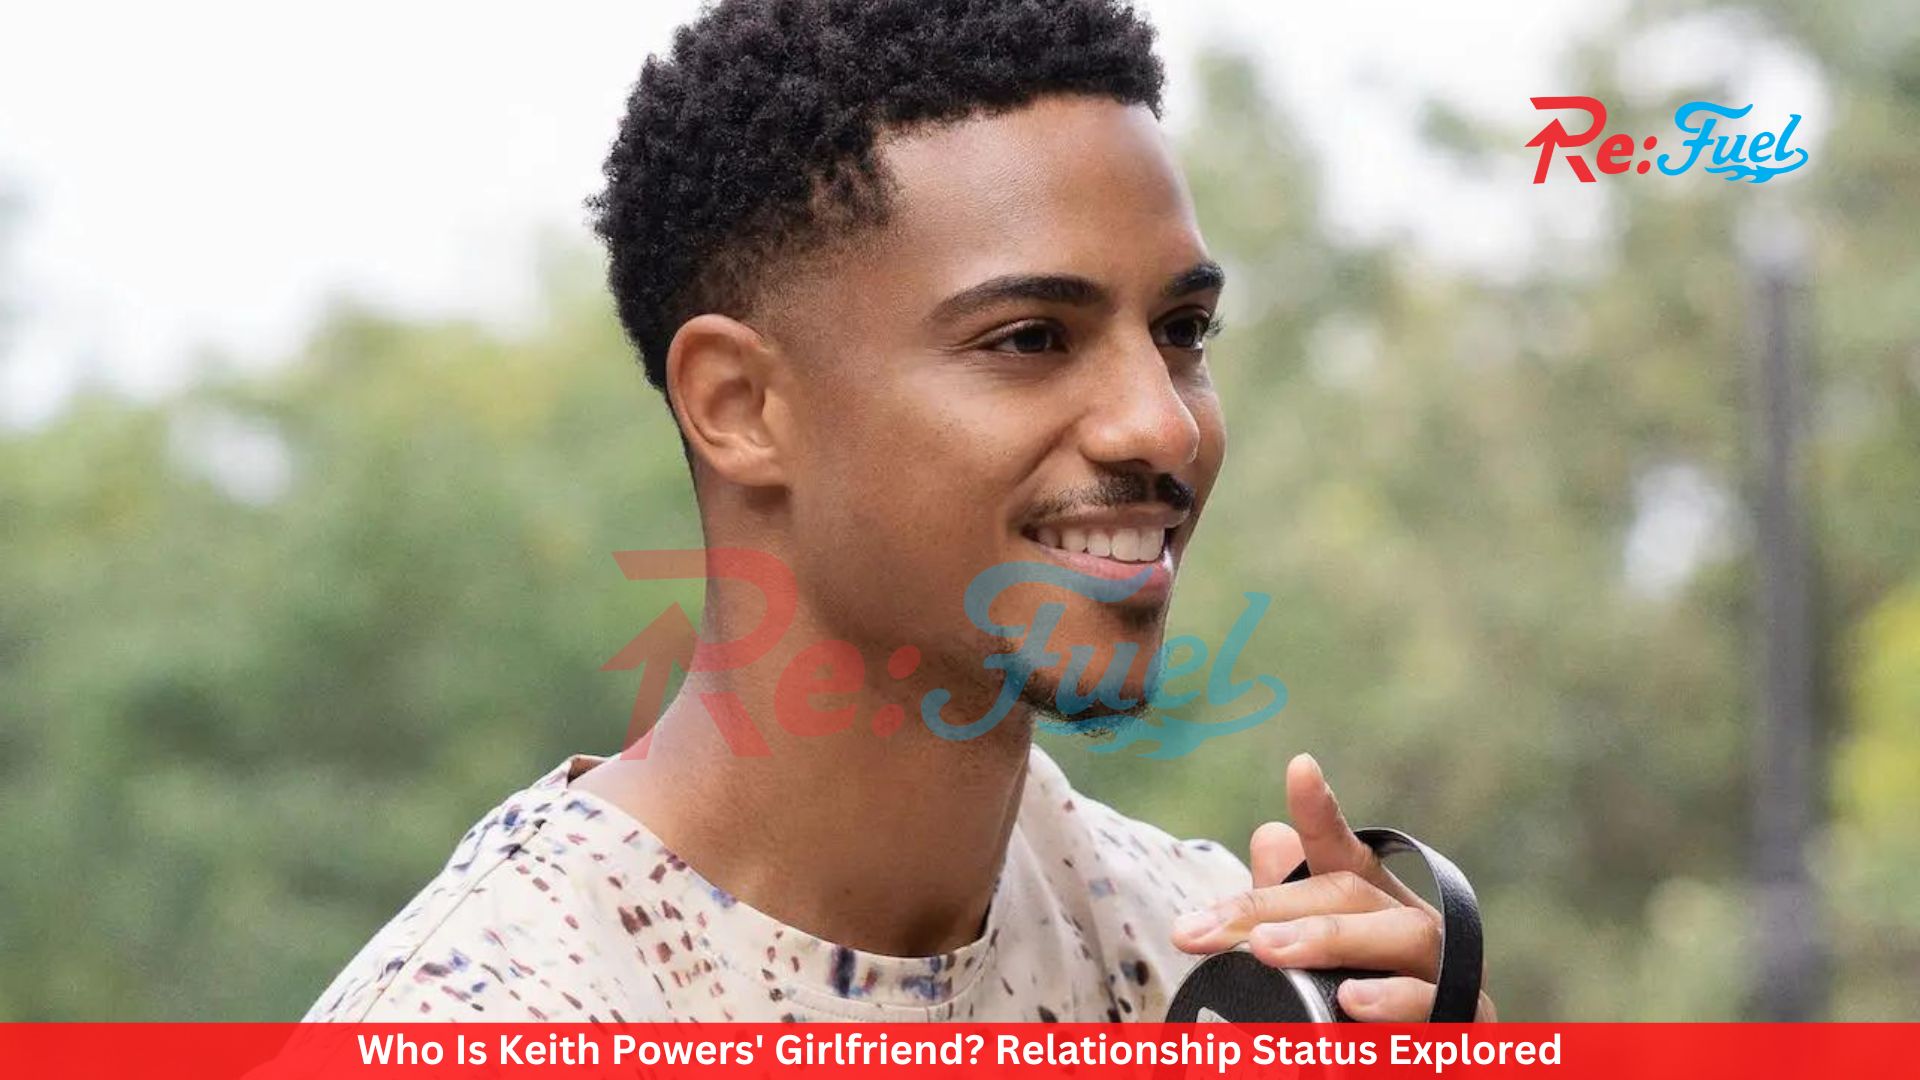 Who Is Keith Powers' Girlfriend? Relationship Status Explored